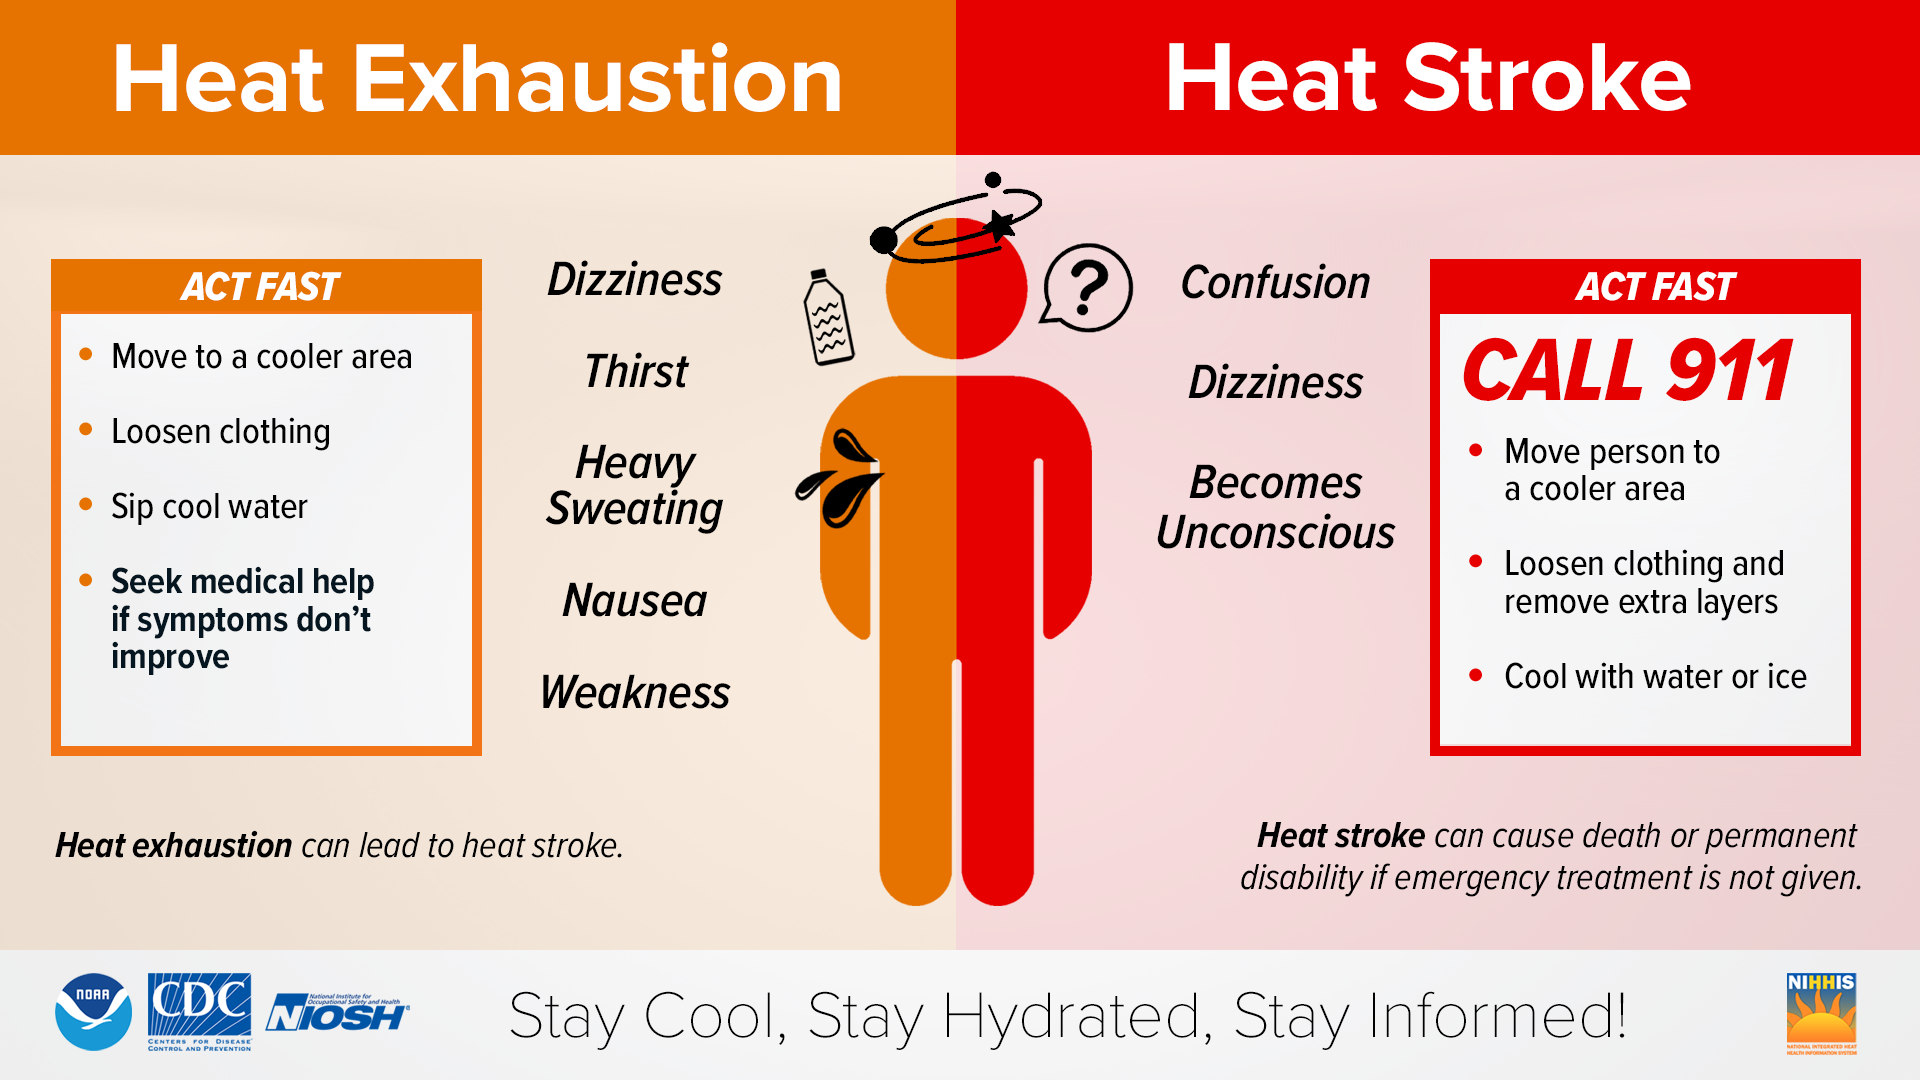 Warning signs for heat exhaustion and heat stroke.